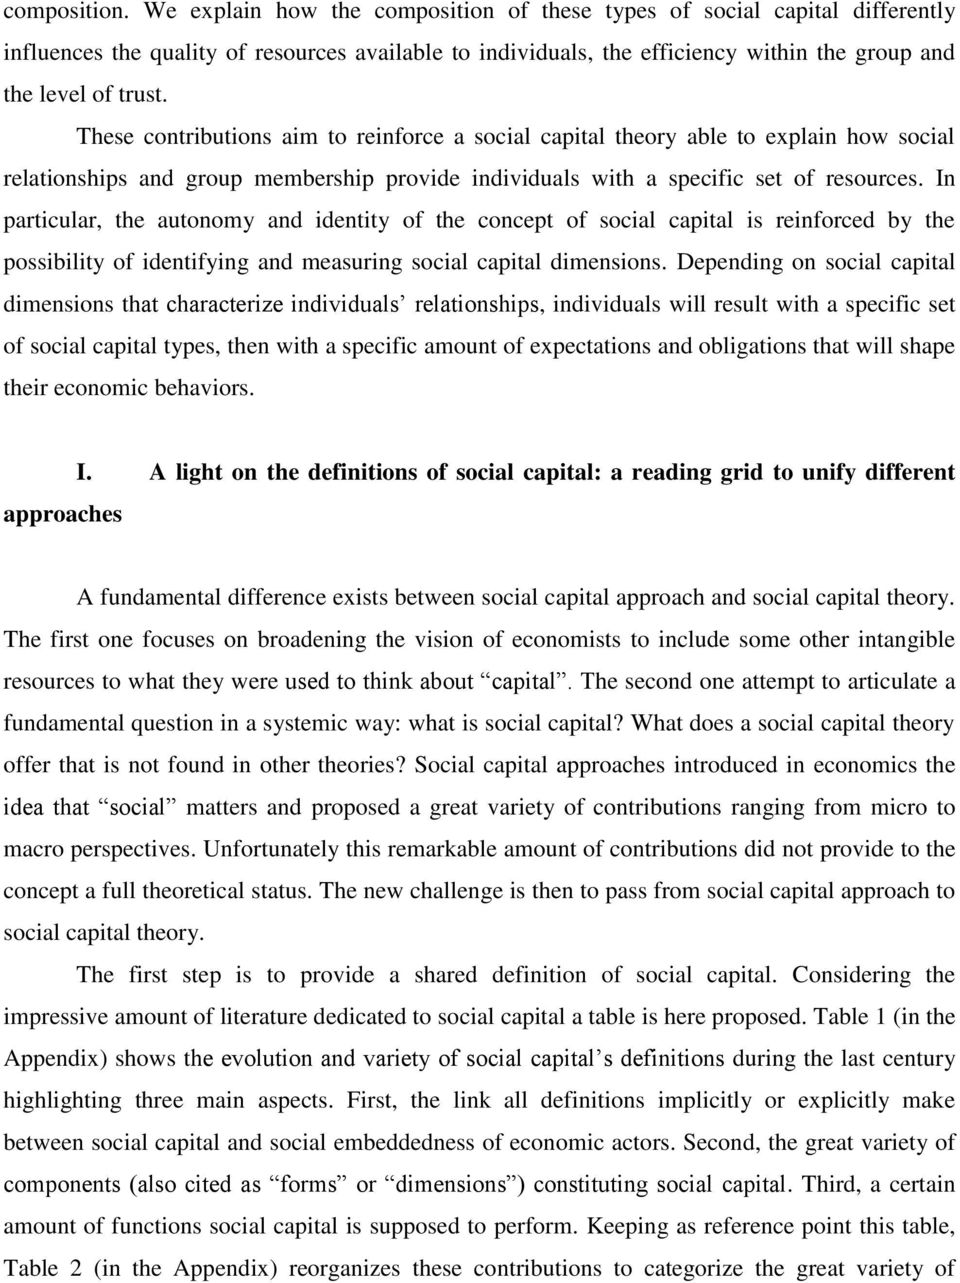 These contributions aim to reinforce a social capital theory able to explain how social relationships and group membership provide individuals with a specific set of resources.